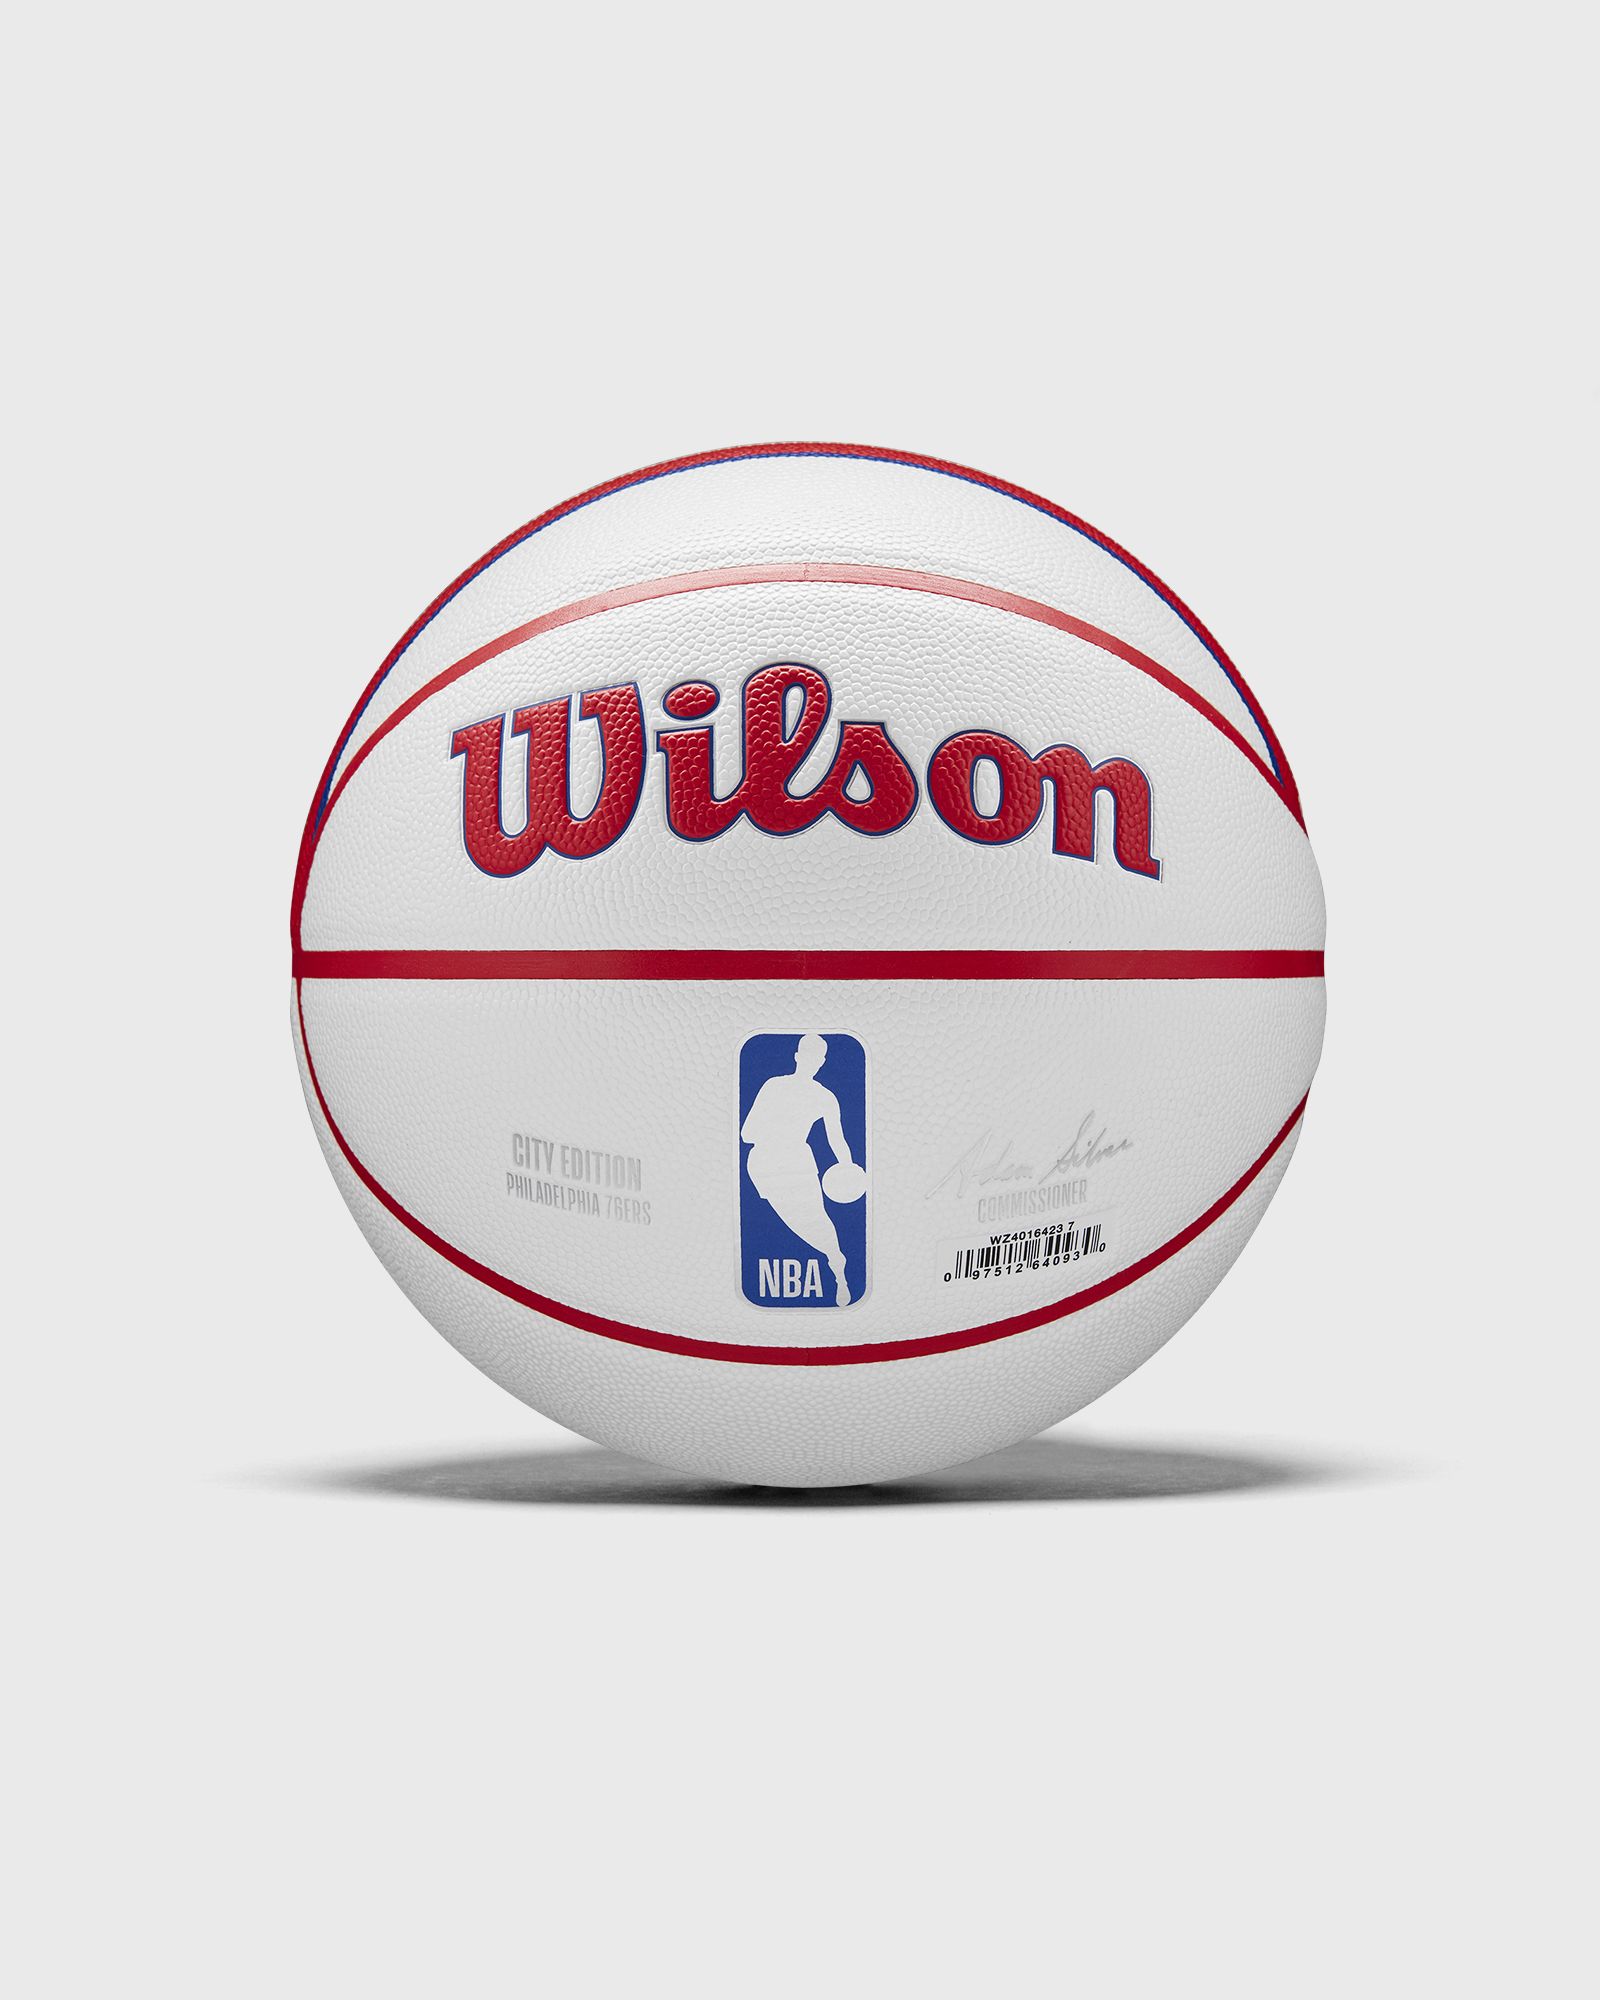 WILSON - nba team city collector basketball philadelphia 76ers size 7 men sports equipment red|white in größe:one size